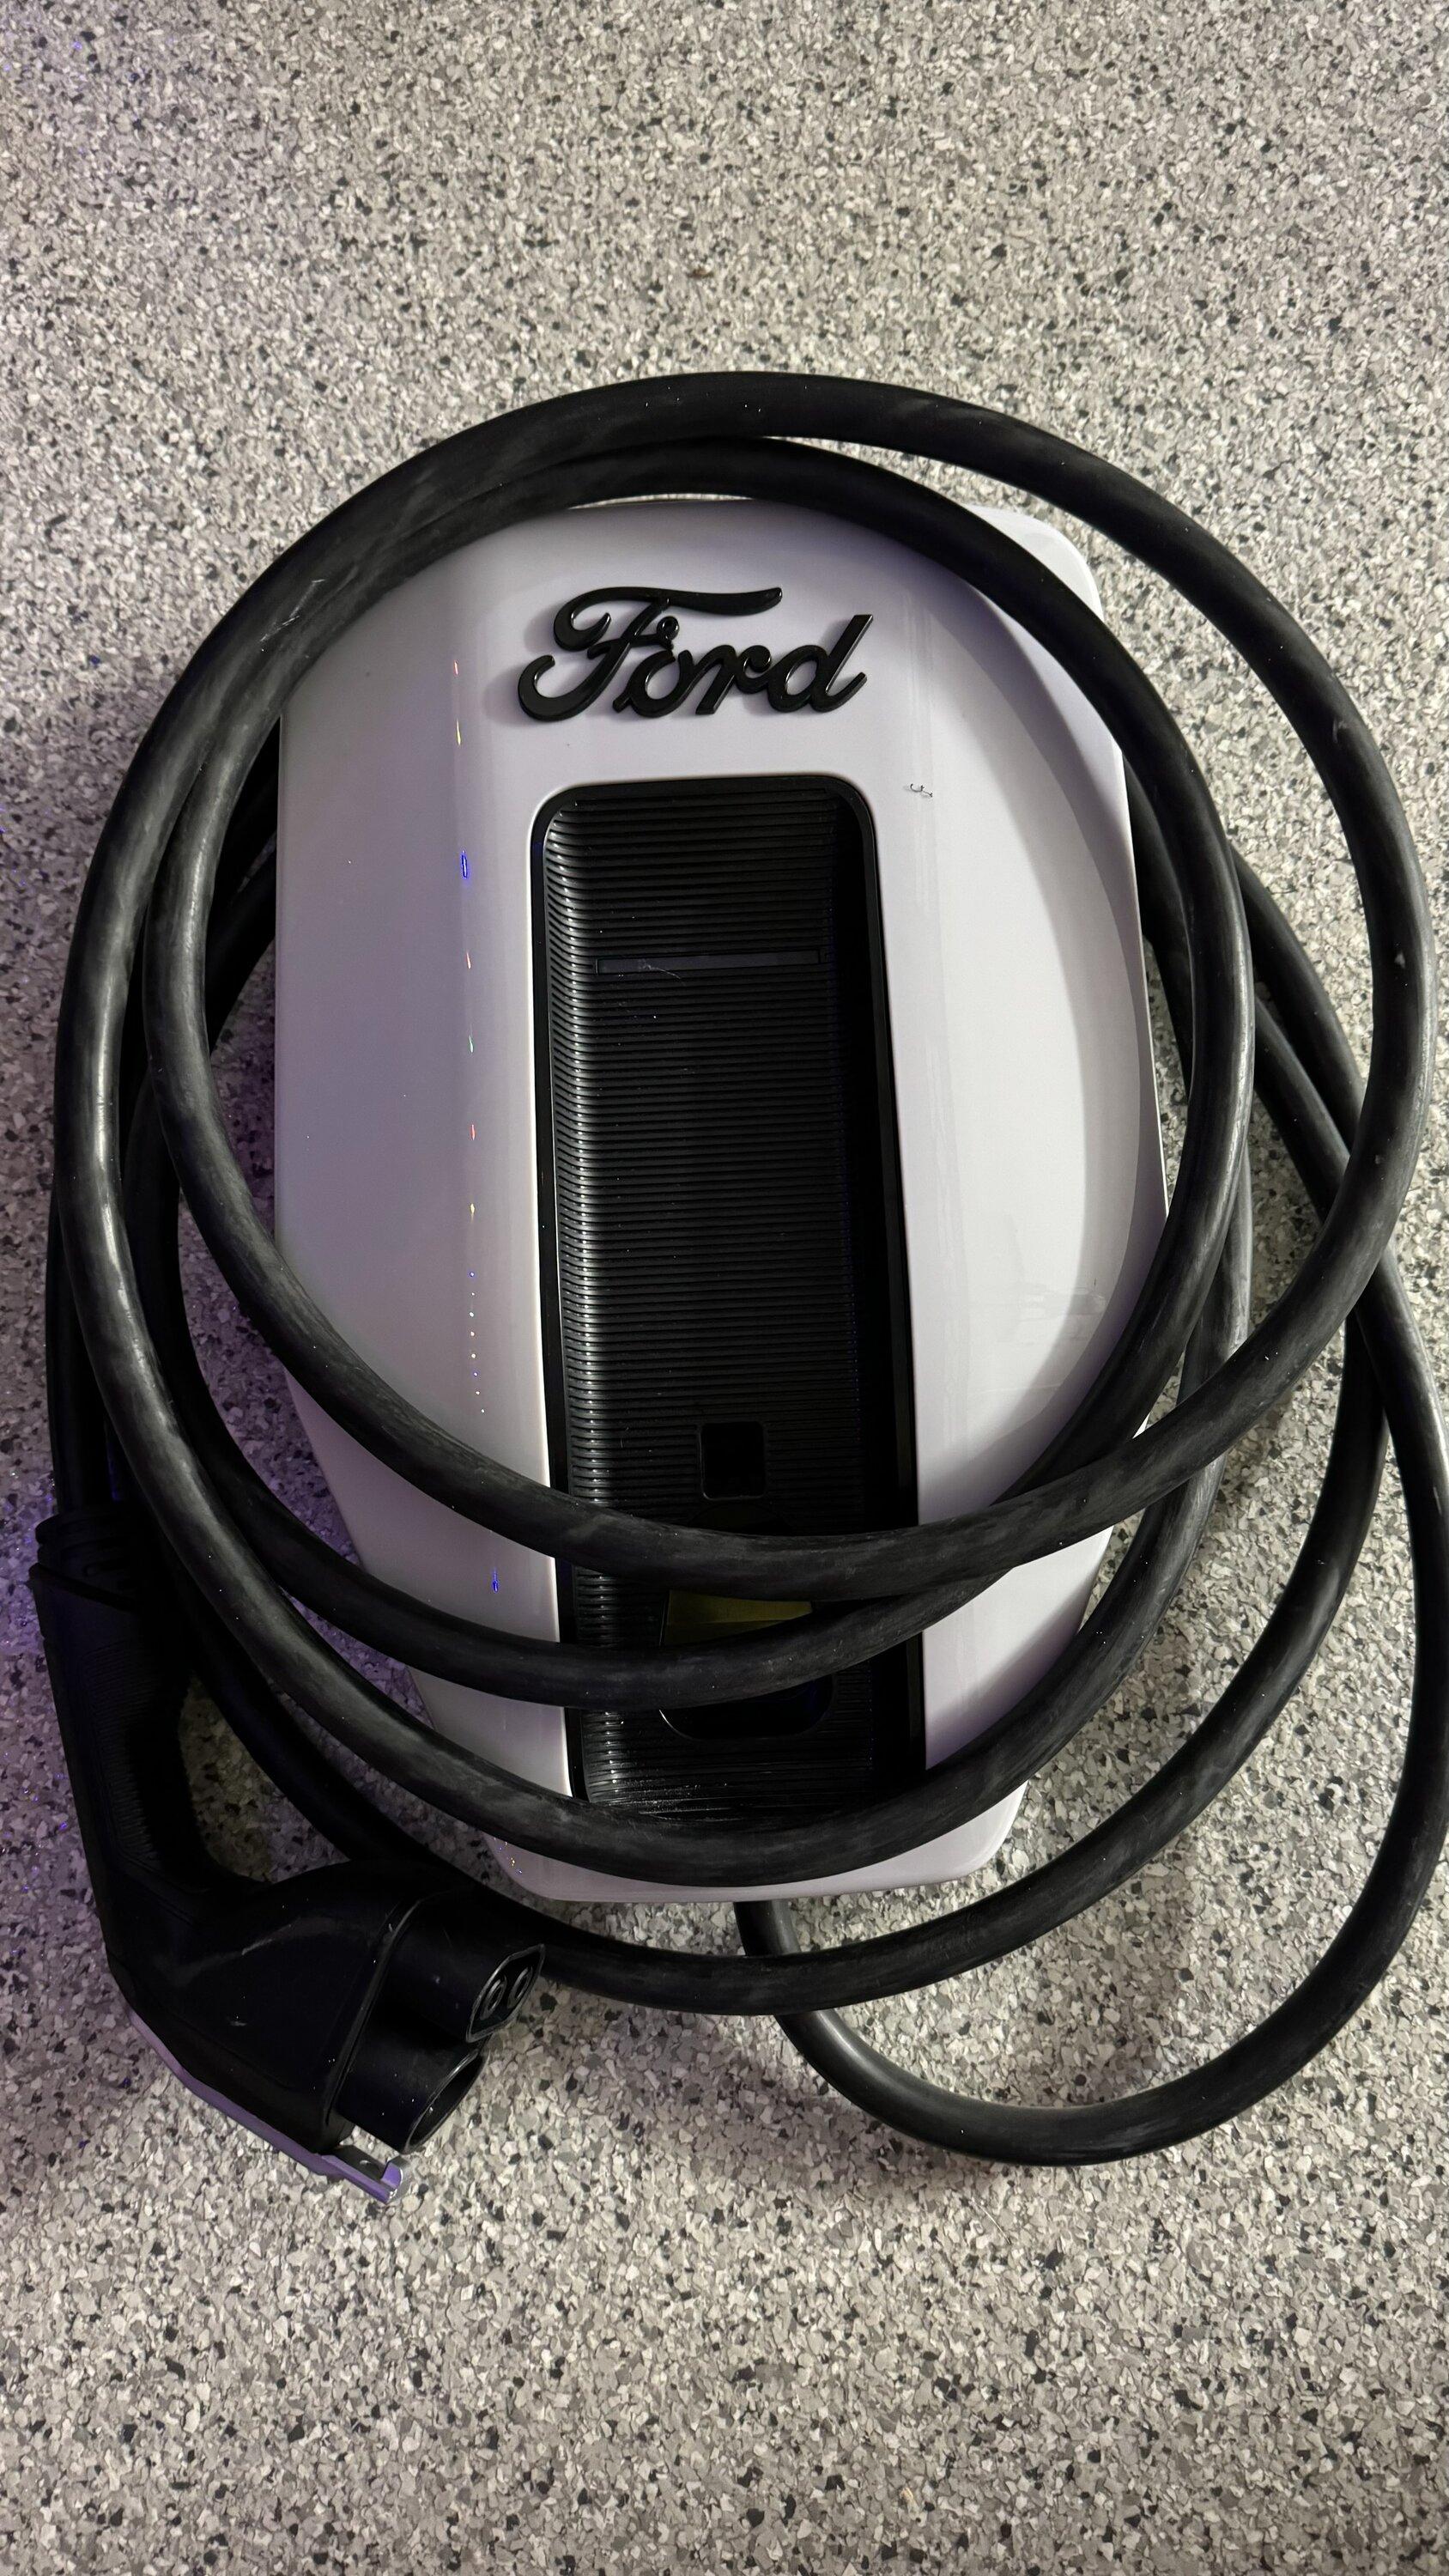 Ford F-150 Lightning Used Charge Station Pro in San Diego (Encinitas) in Very Good Condition $200 IMG_1117